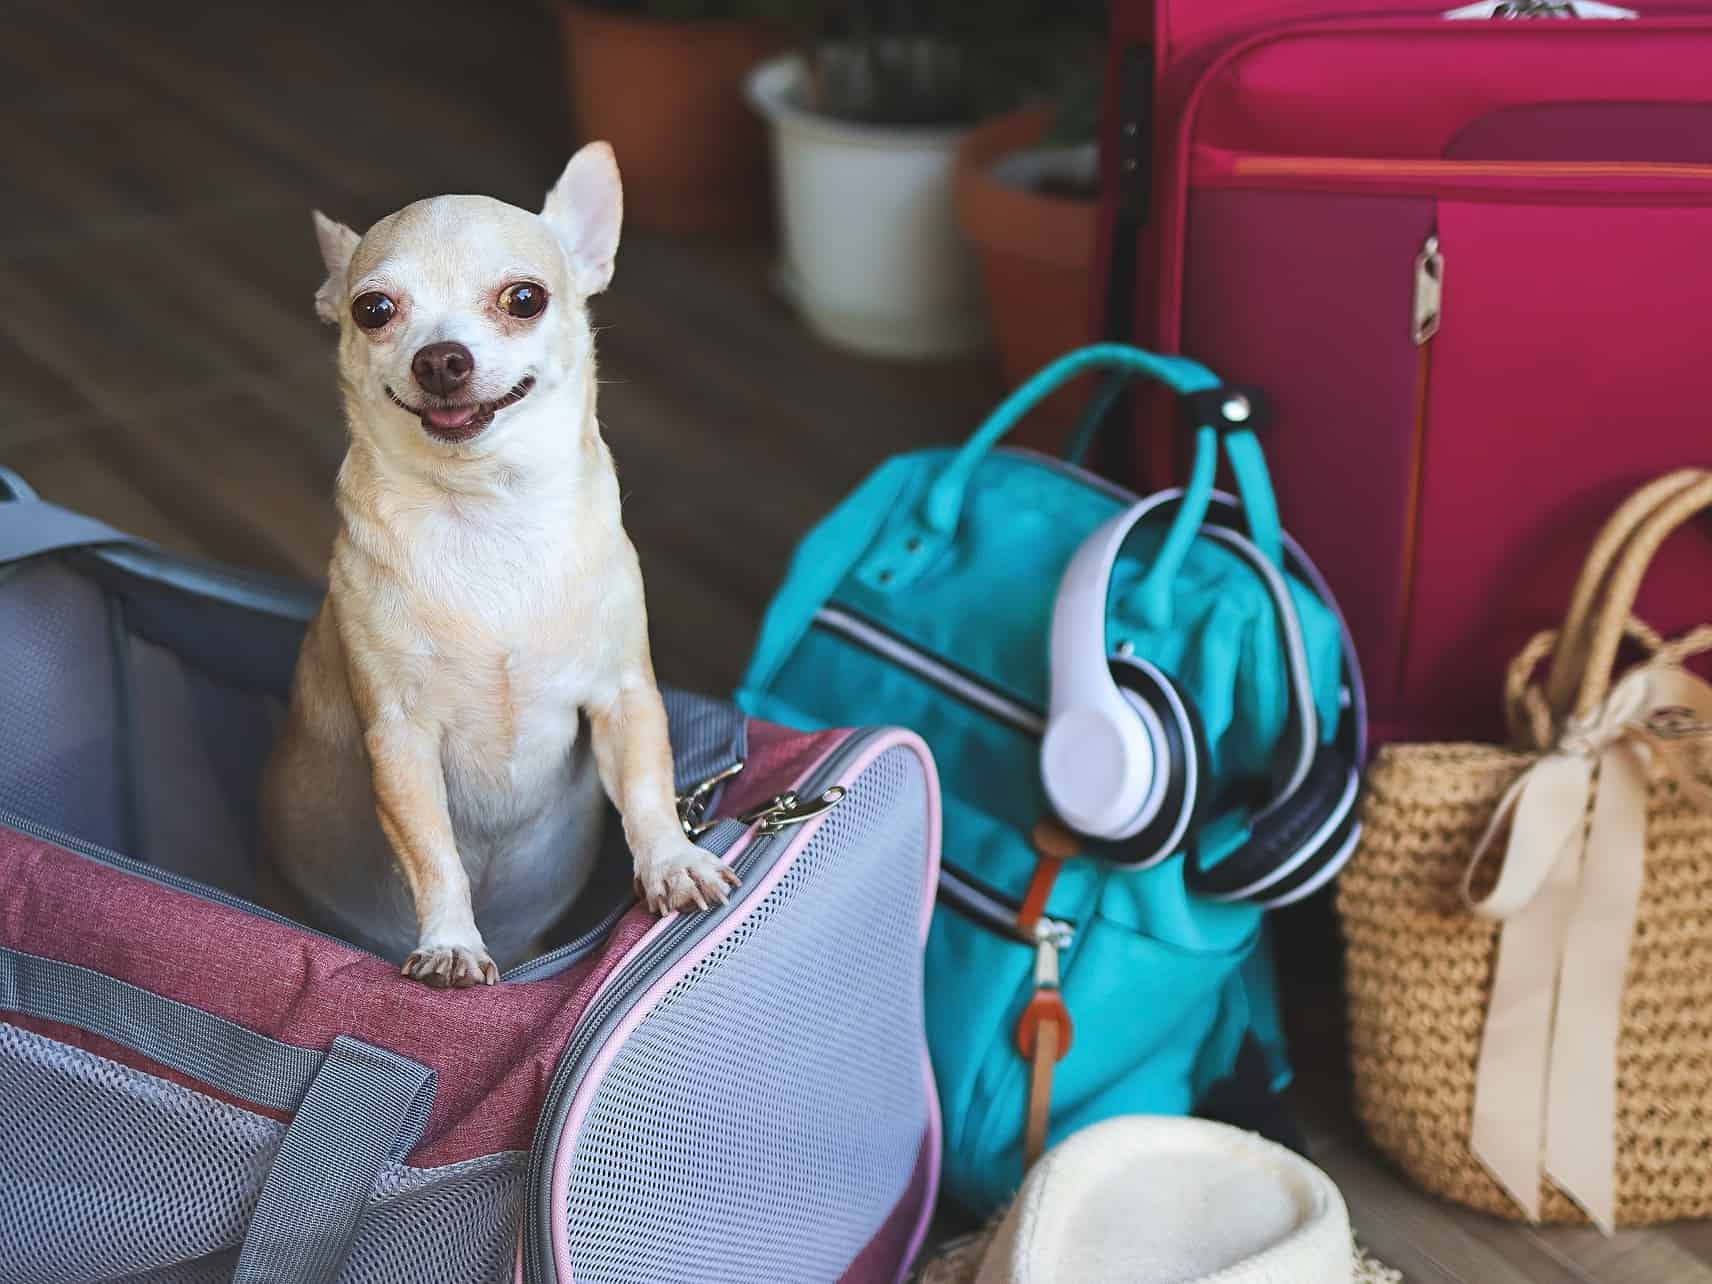 How to find pet-friendly accommodation